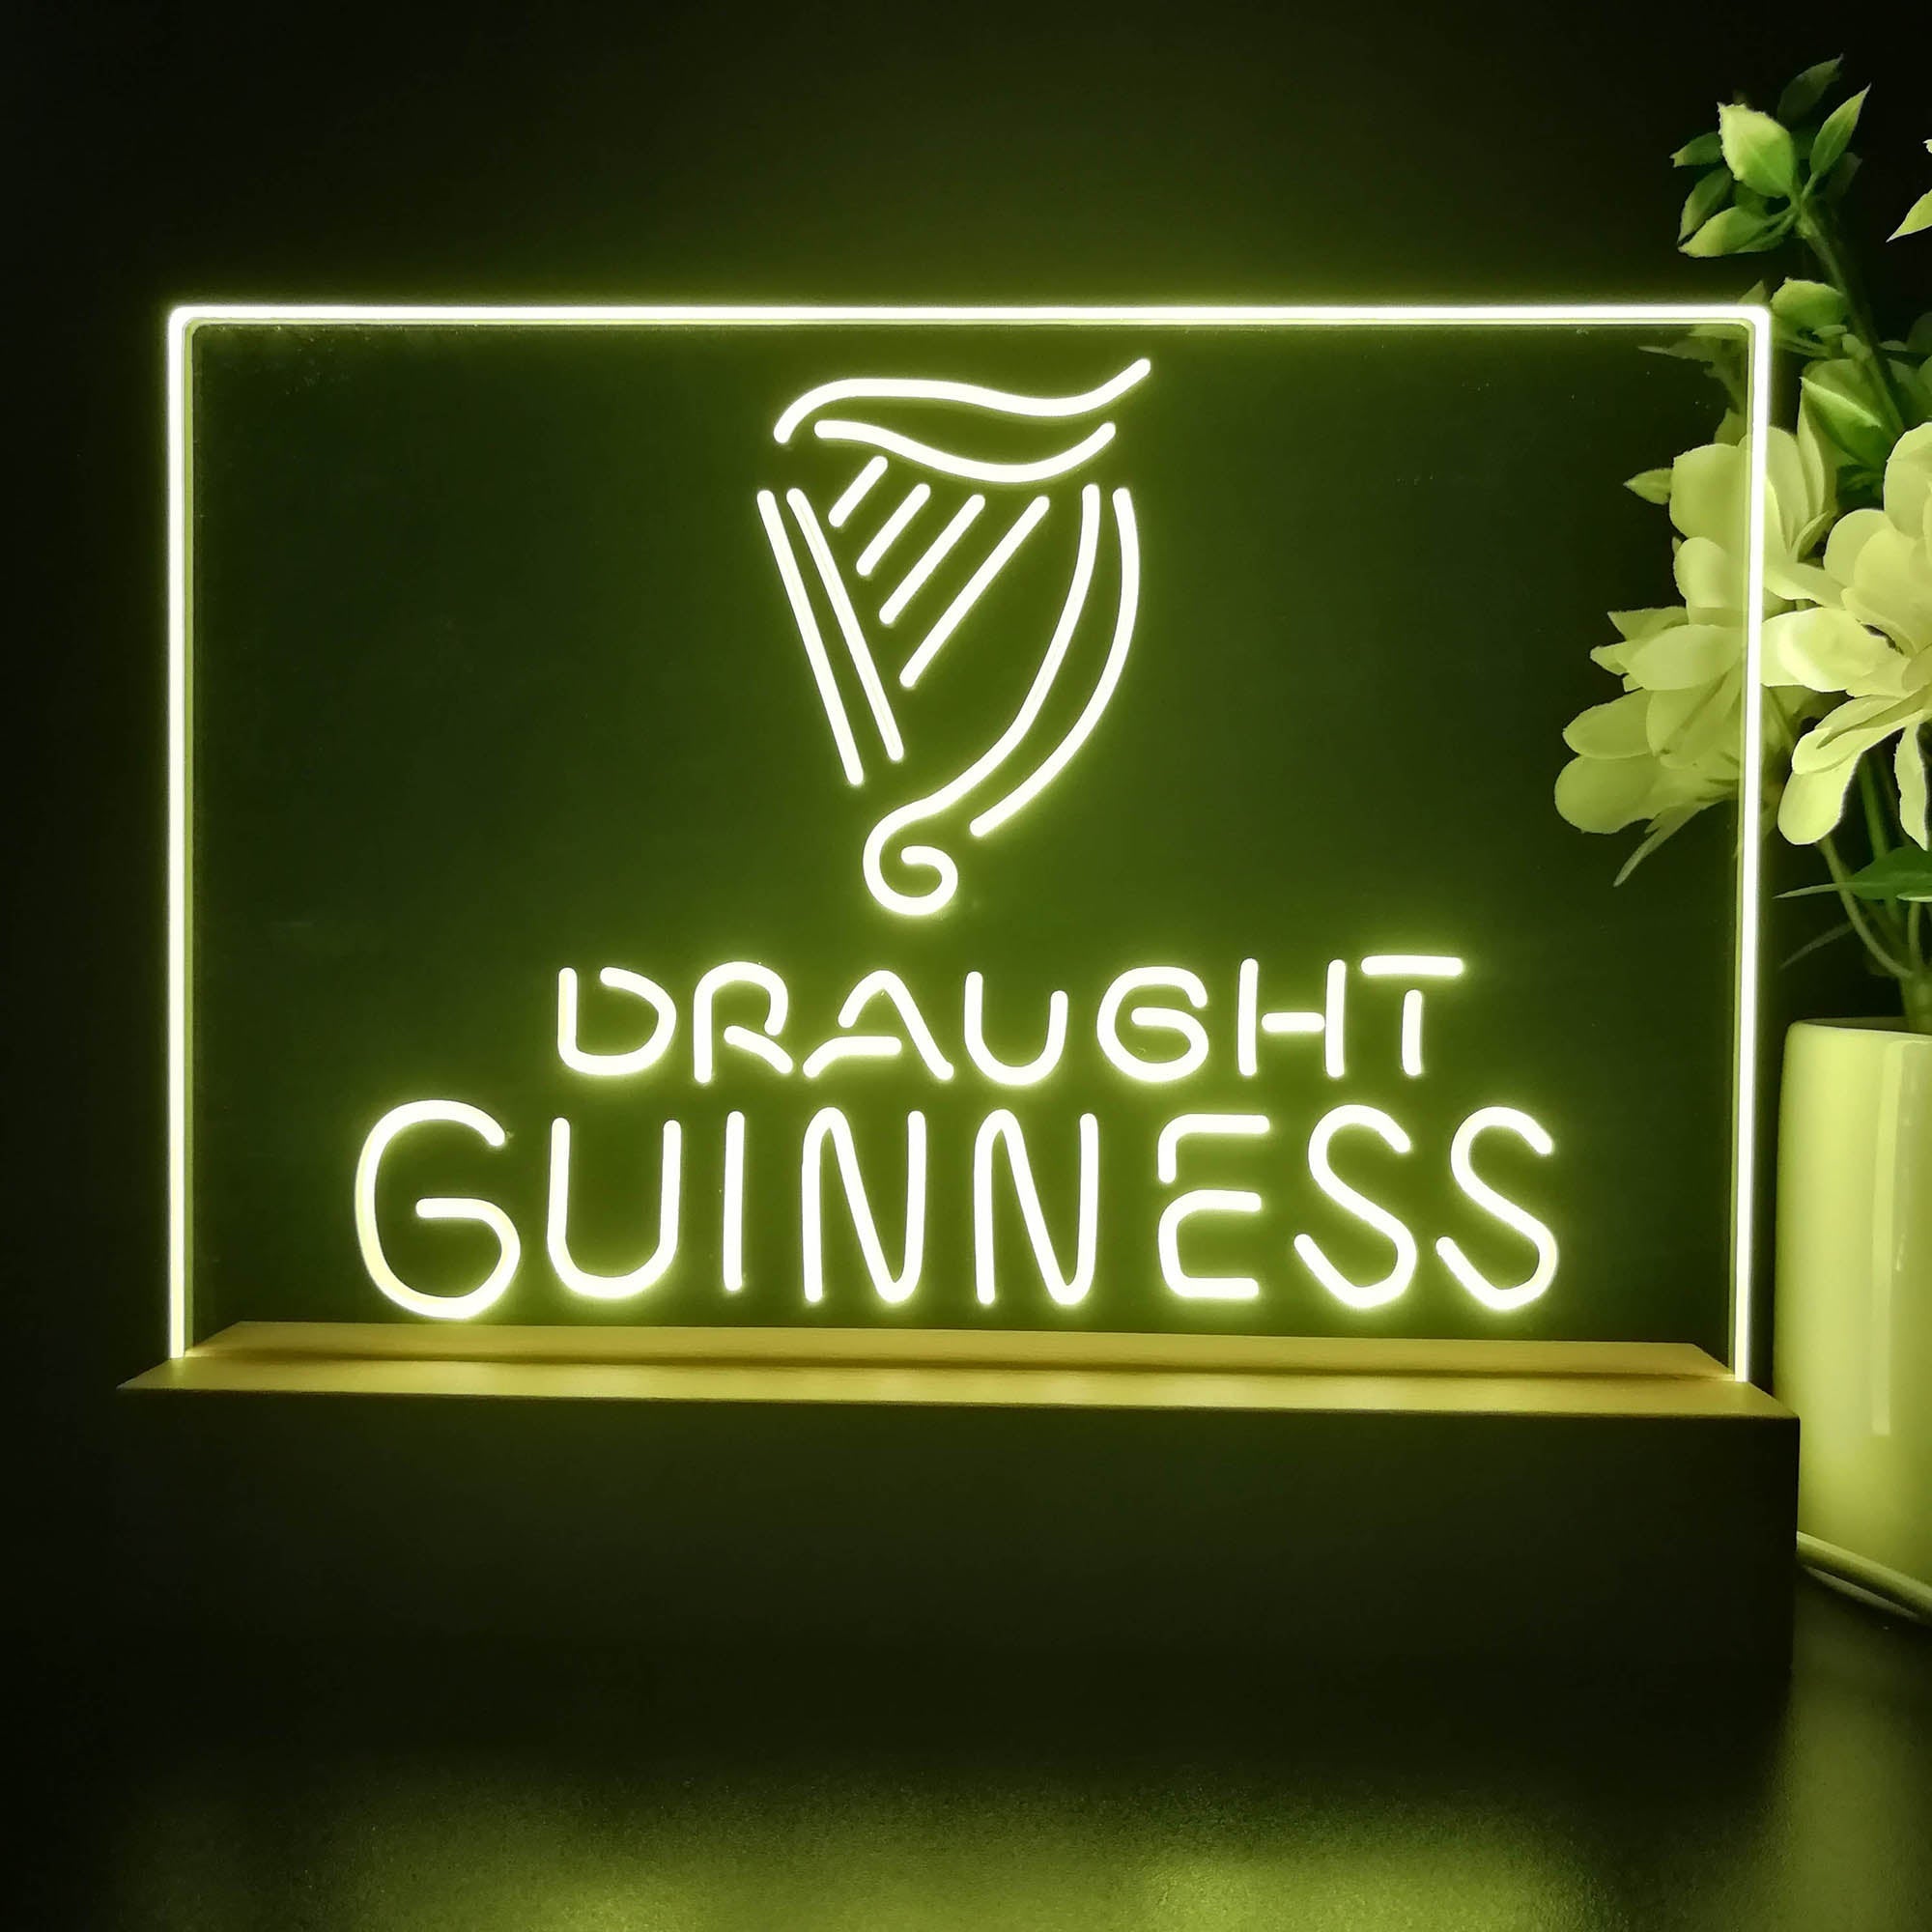 Guinness Draught on tap Neon Sign Pub Bar Lamp